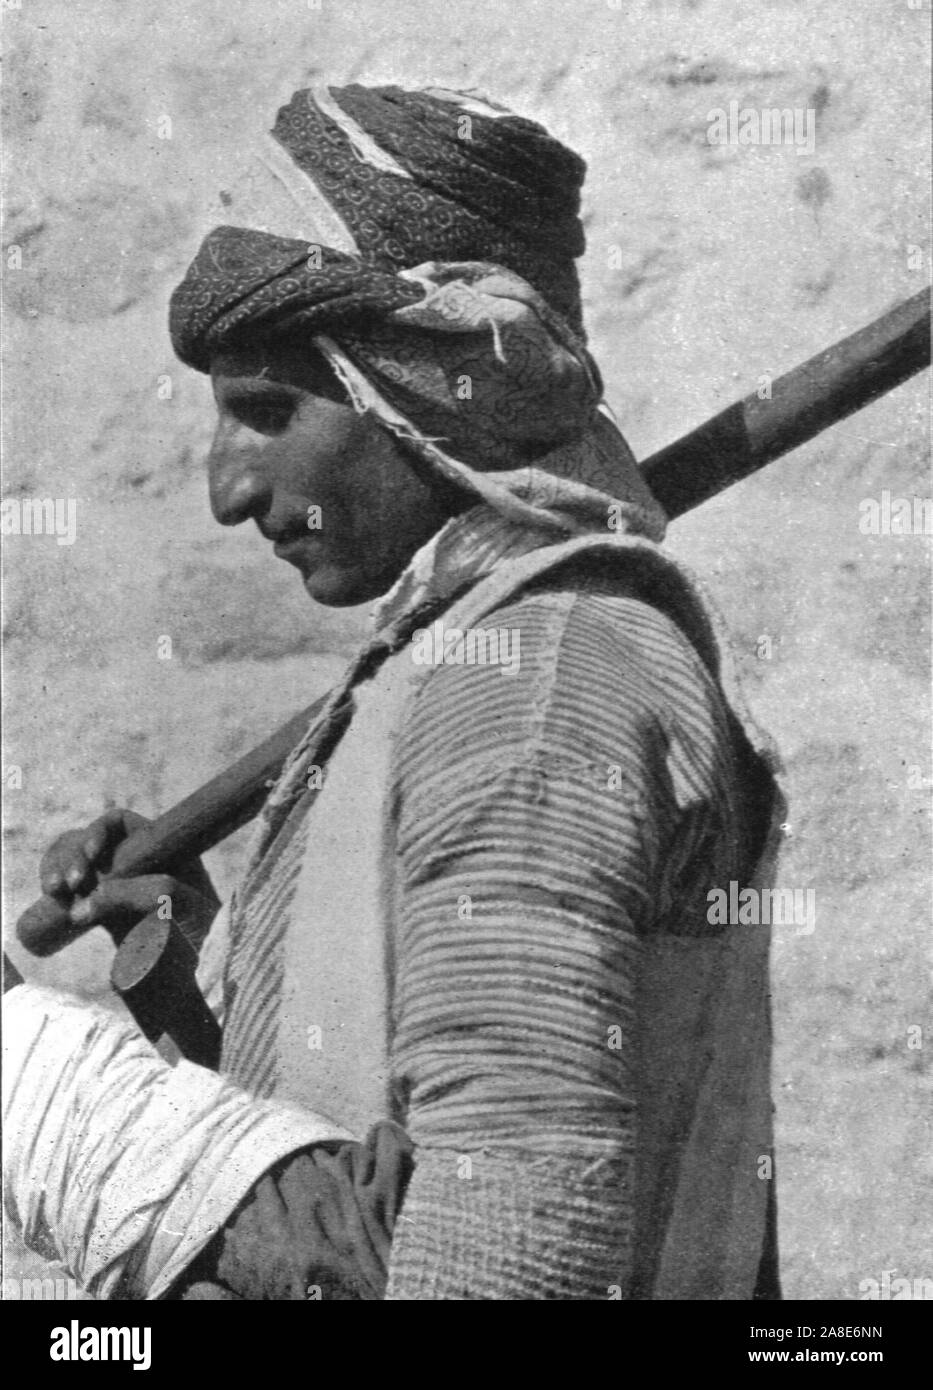 'Kurd of Neri', c1906-1913, (1915). Profile portrait of a Kurdish man from what is now eastern Turkey. From &quot;The Caliphs' Last Heritage, a short history of the Turkish Empire&quot; by Lt.-Col. Sir Mark Sykes. [Macmillan &amp; Co, London, 1915] Stock Photo